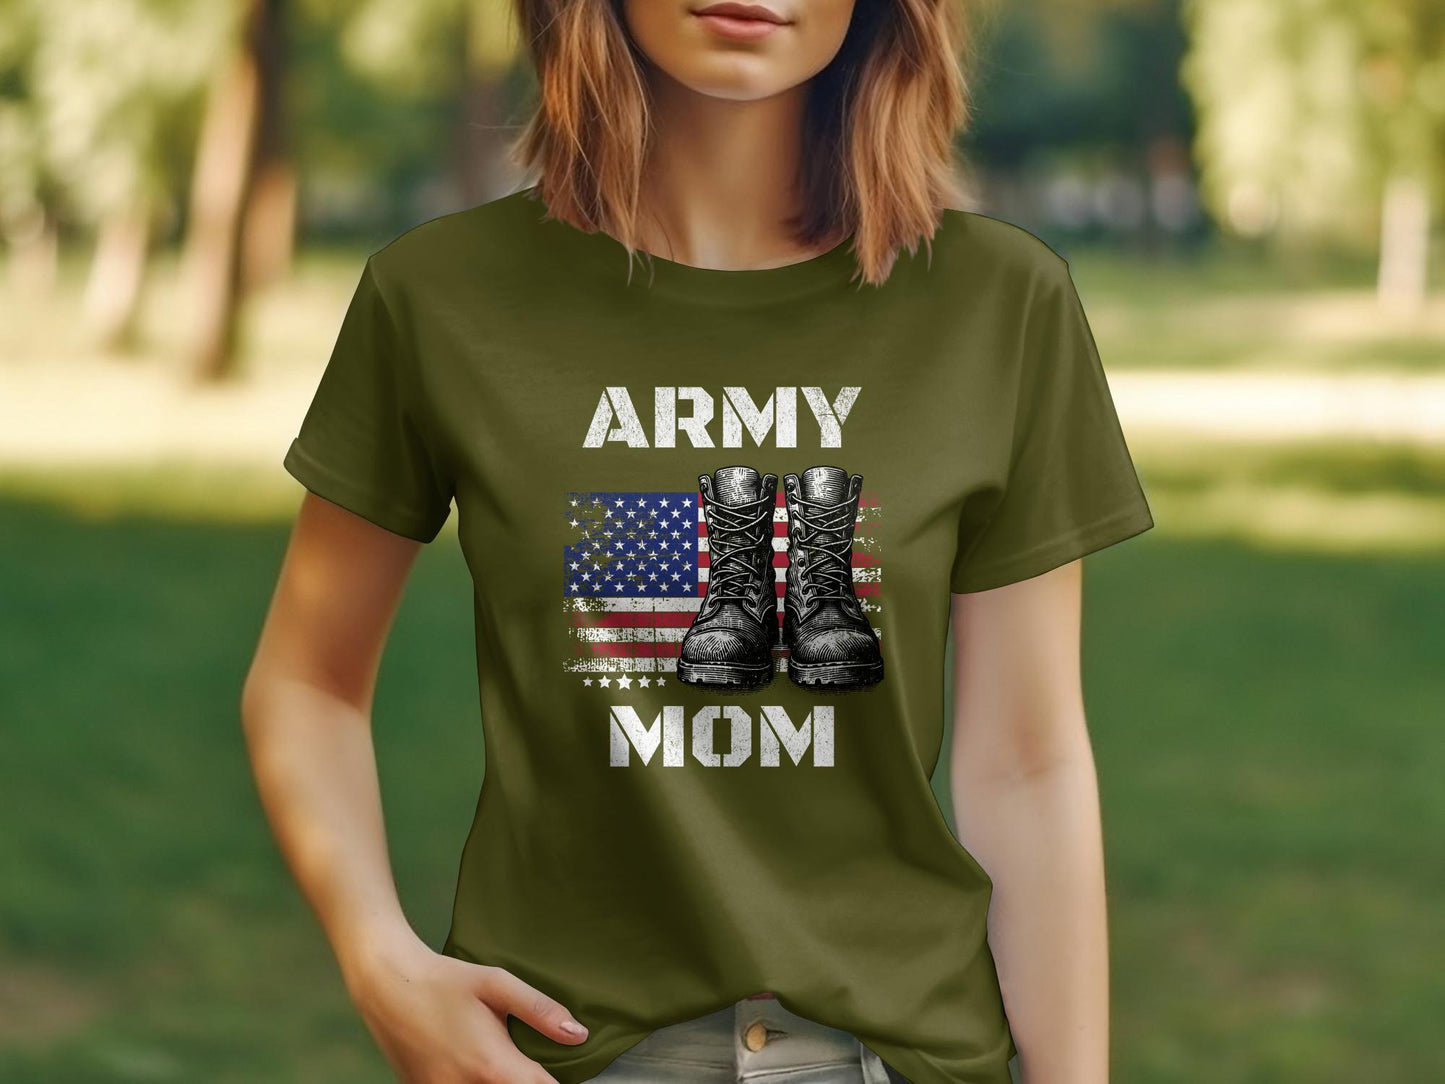 Army Mom Vintage American Flag and Boots T-Shirt - Mardonyx T-Shirt XS / Olive